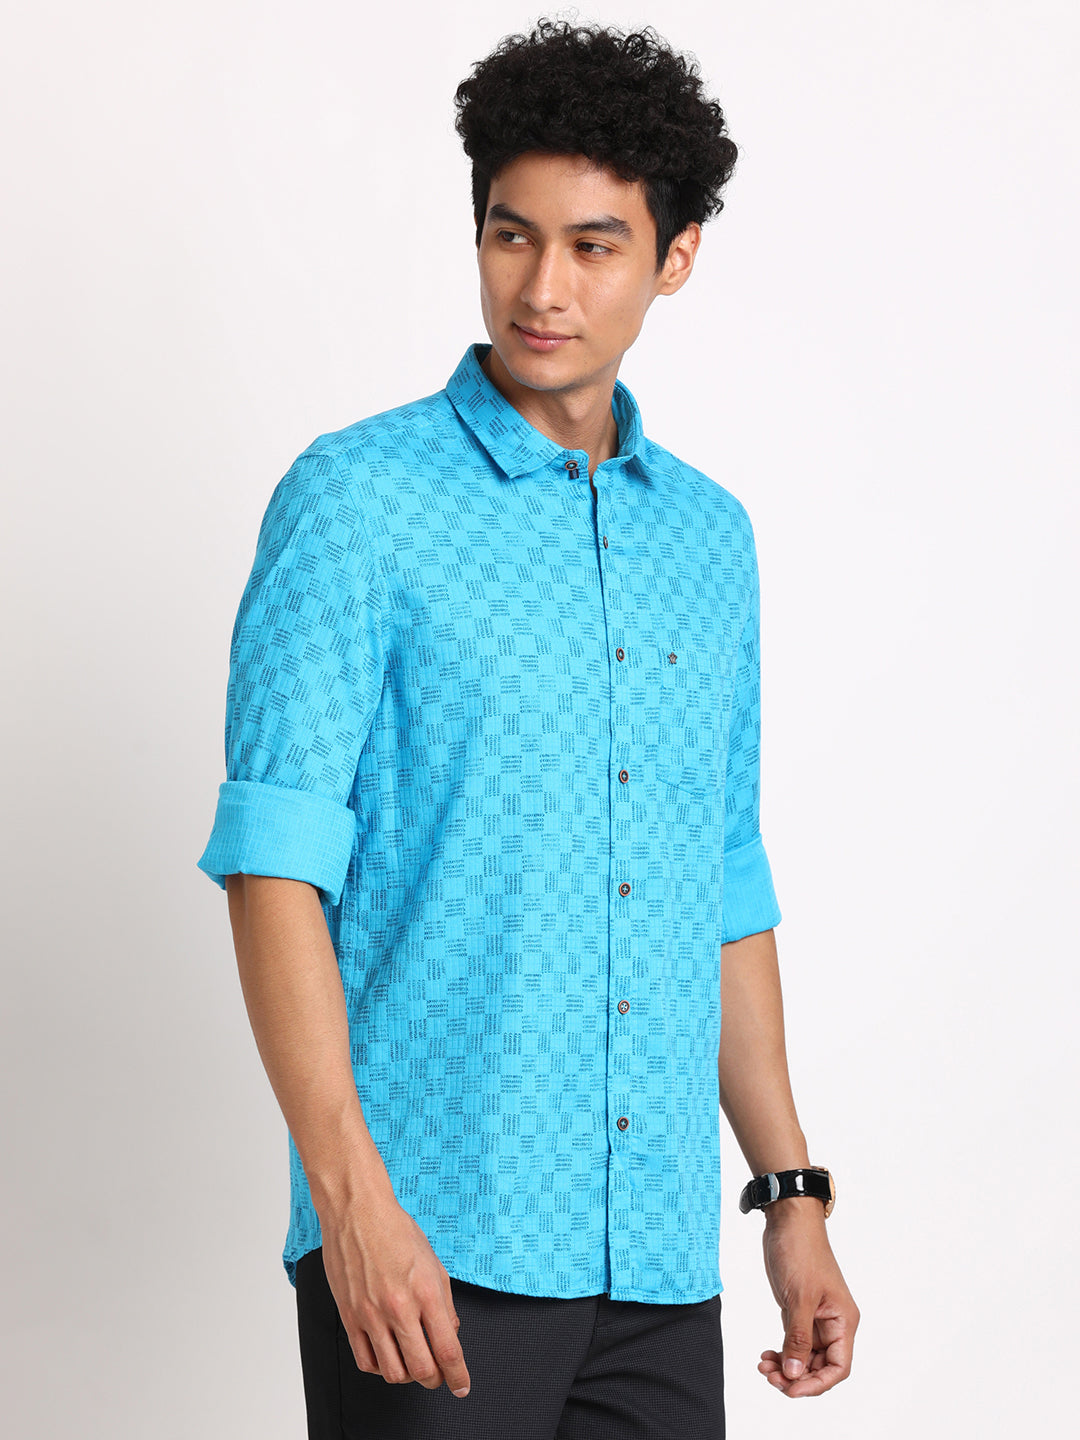 100% Cotton Light Blue Printed Slim Fit Full Sleeve Casual Shirt